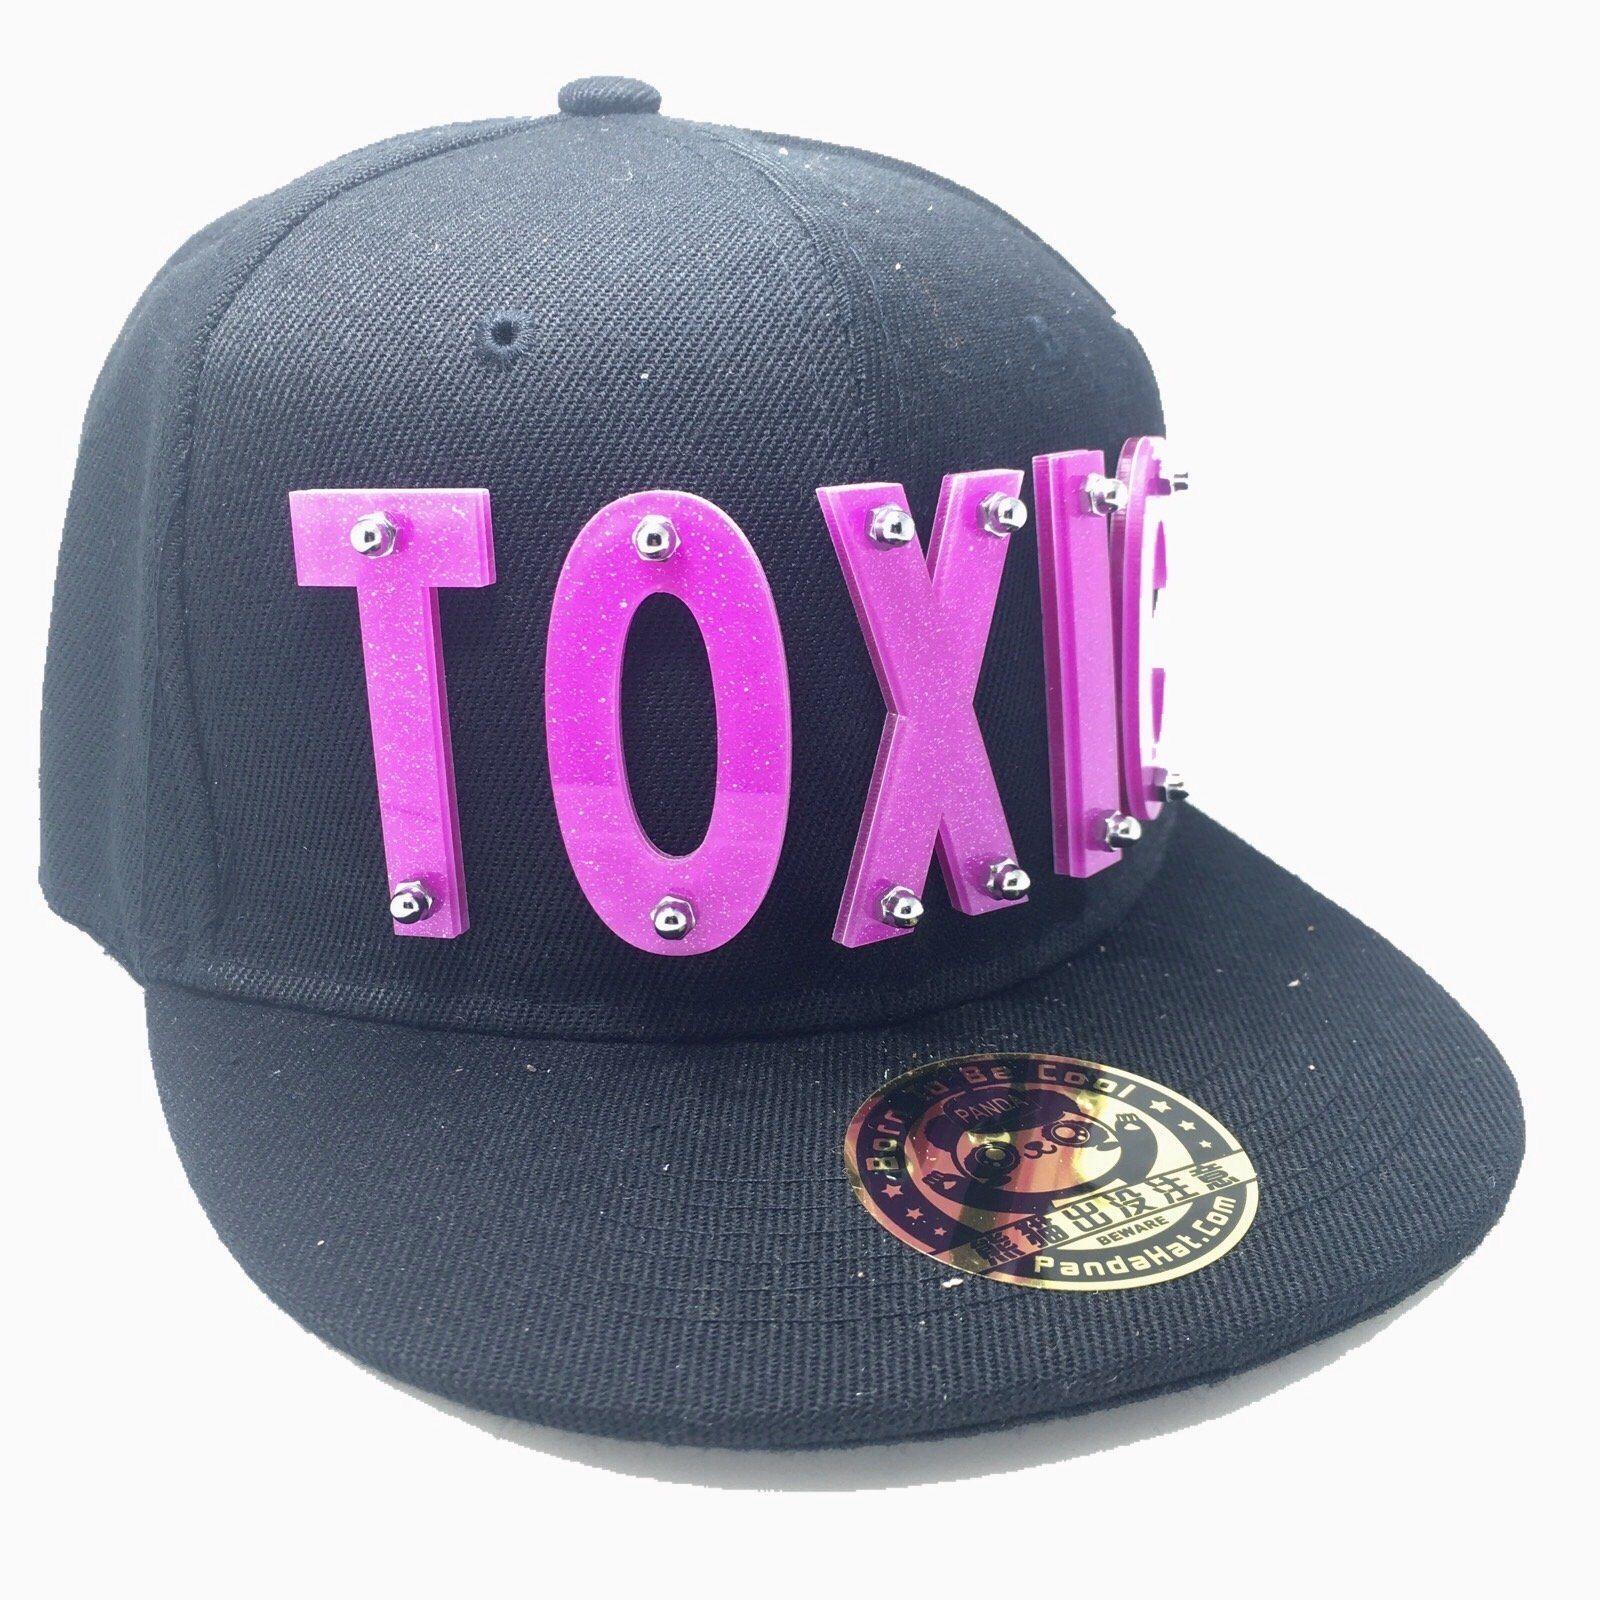 Blue and Black Toxic Logo - TOXIC HAT IN BLACK